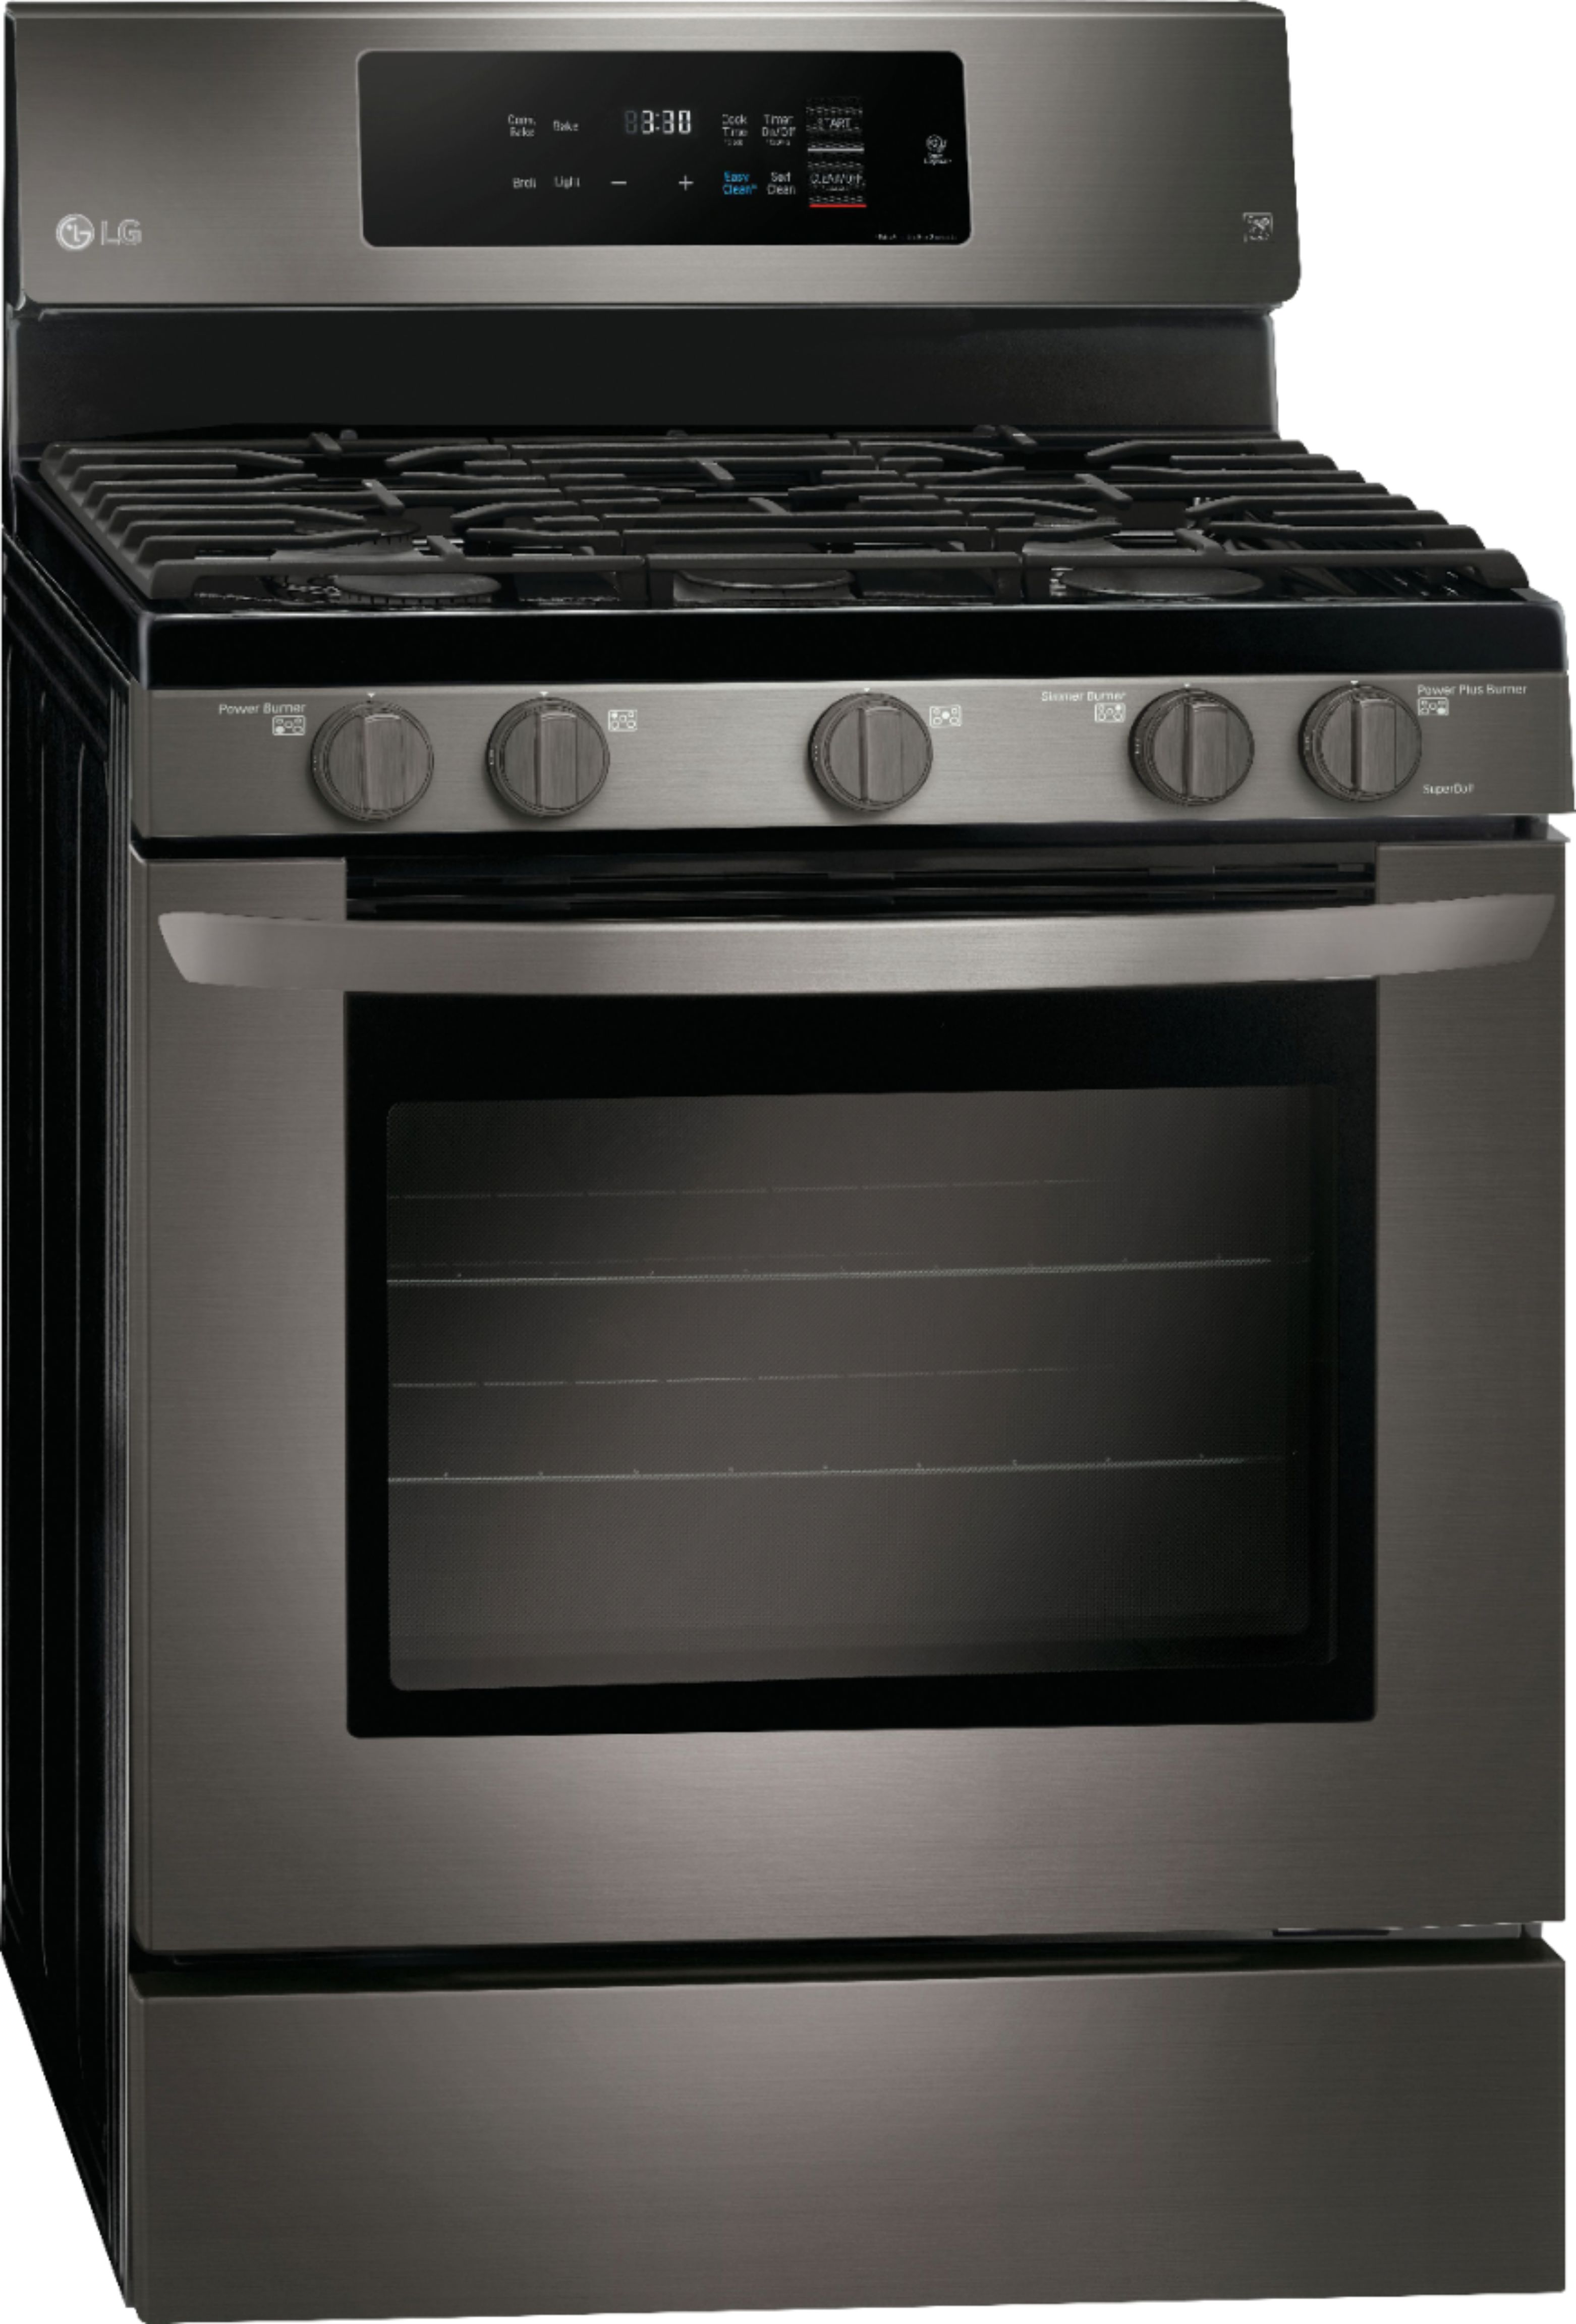 Angle View: GE - 5.3 Cu. Ft. Slide-In Gas Range - Stainless steel